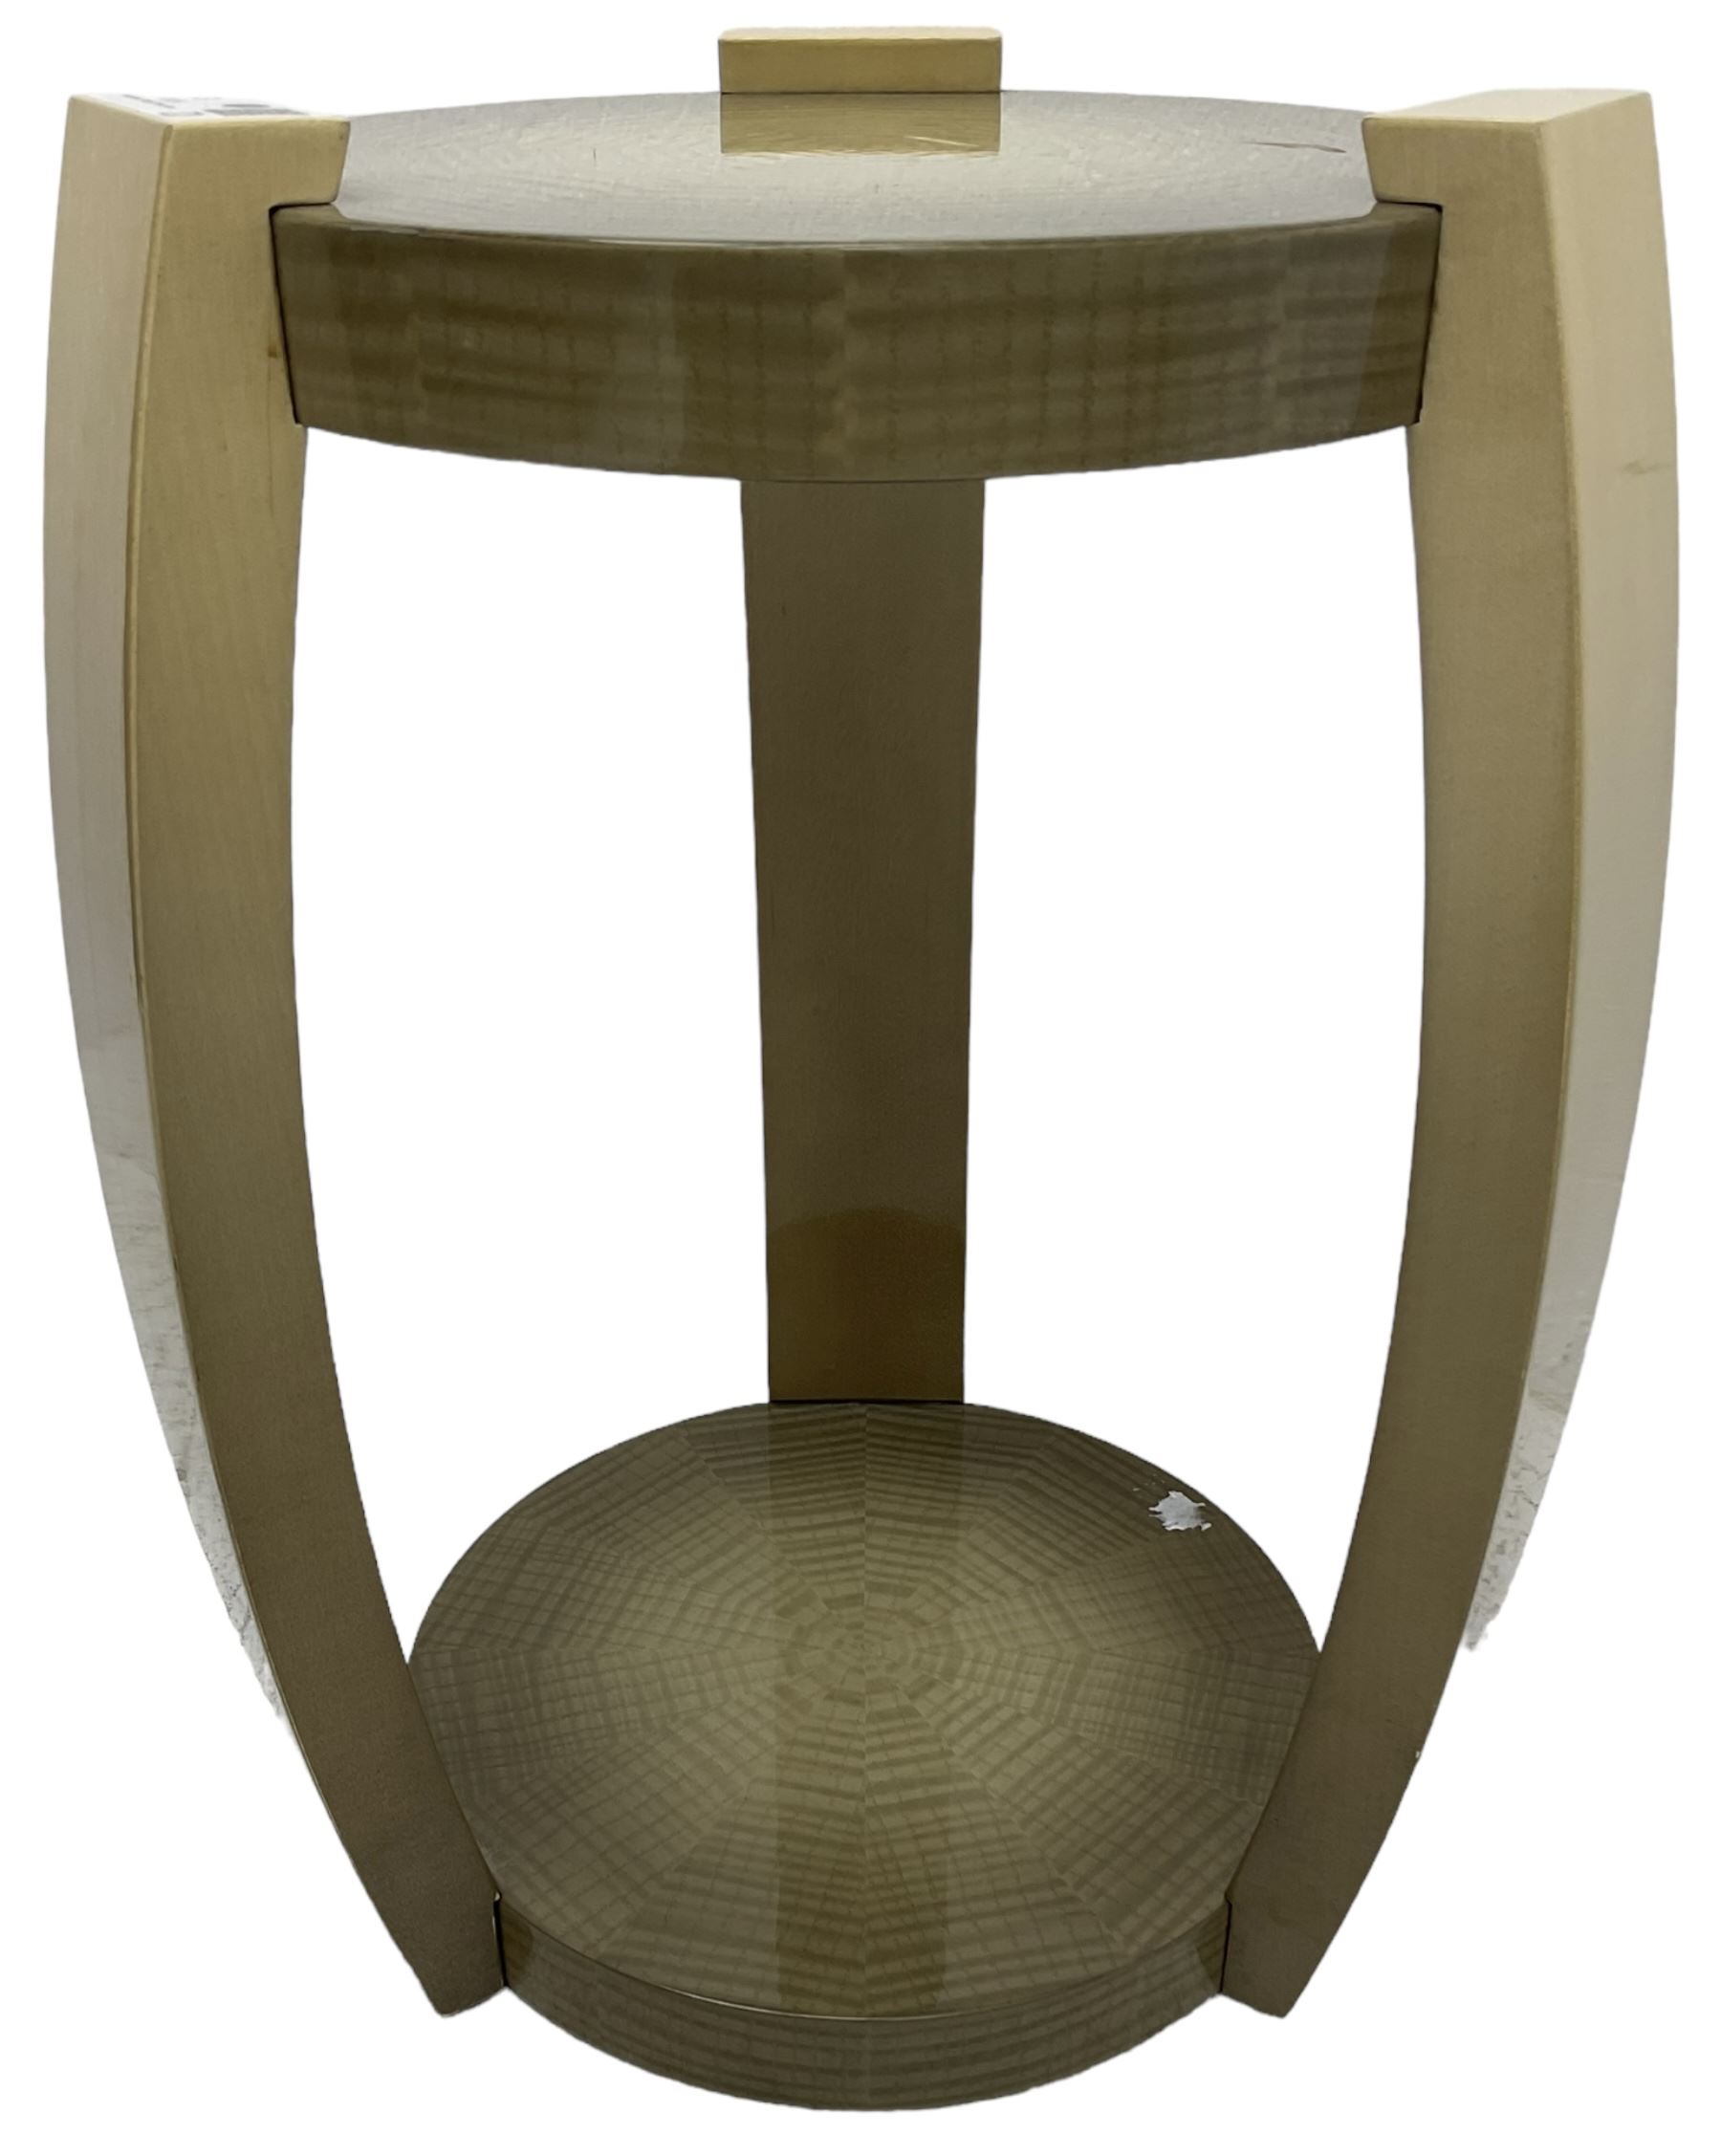 Sally Sirkin Lewis for J Robert Scott - 21st century 'Harlow' two-tier occasional table - Image 3 of 4